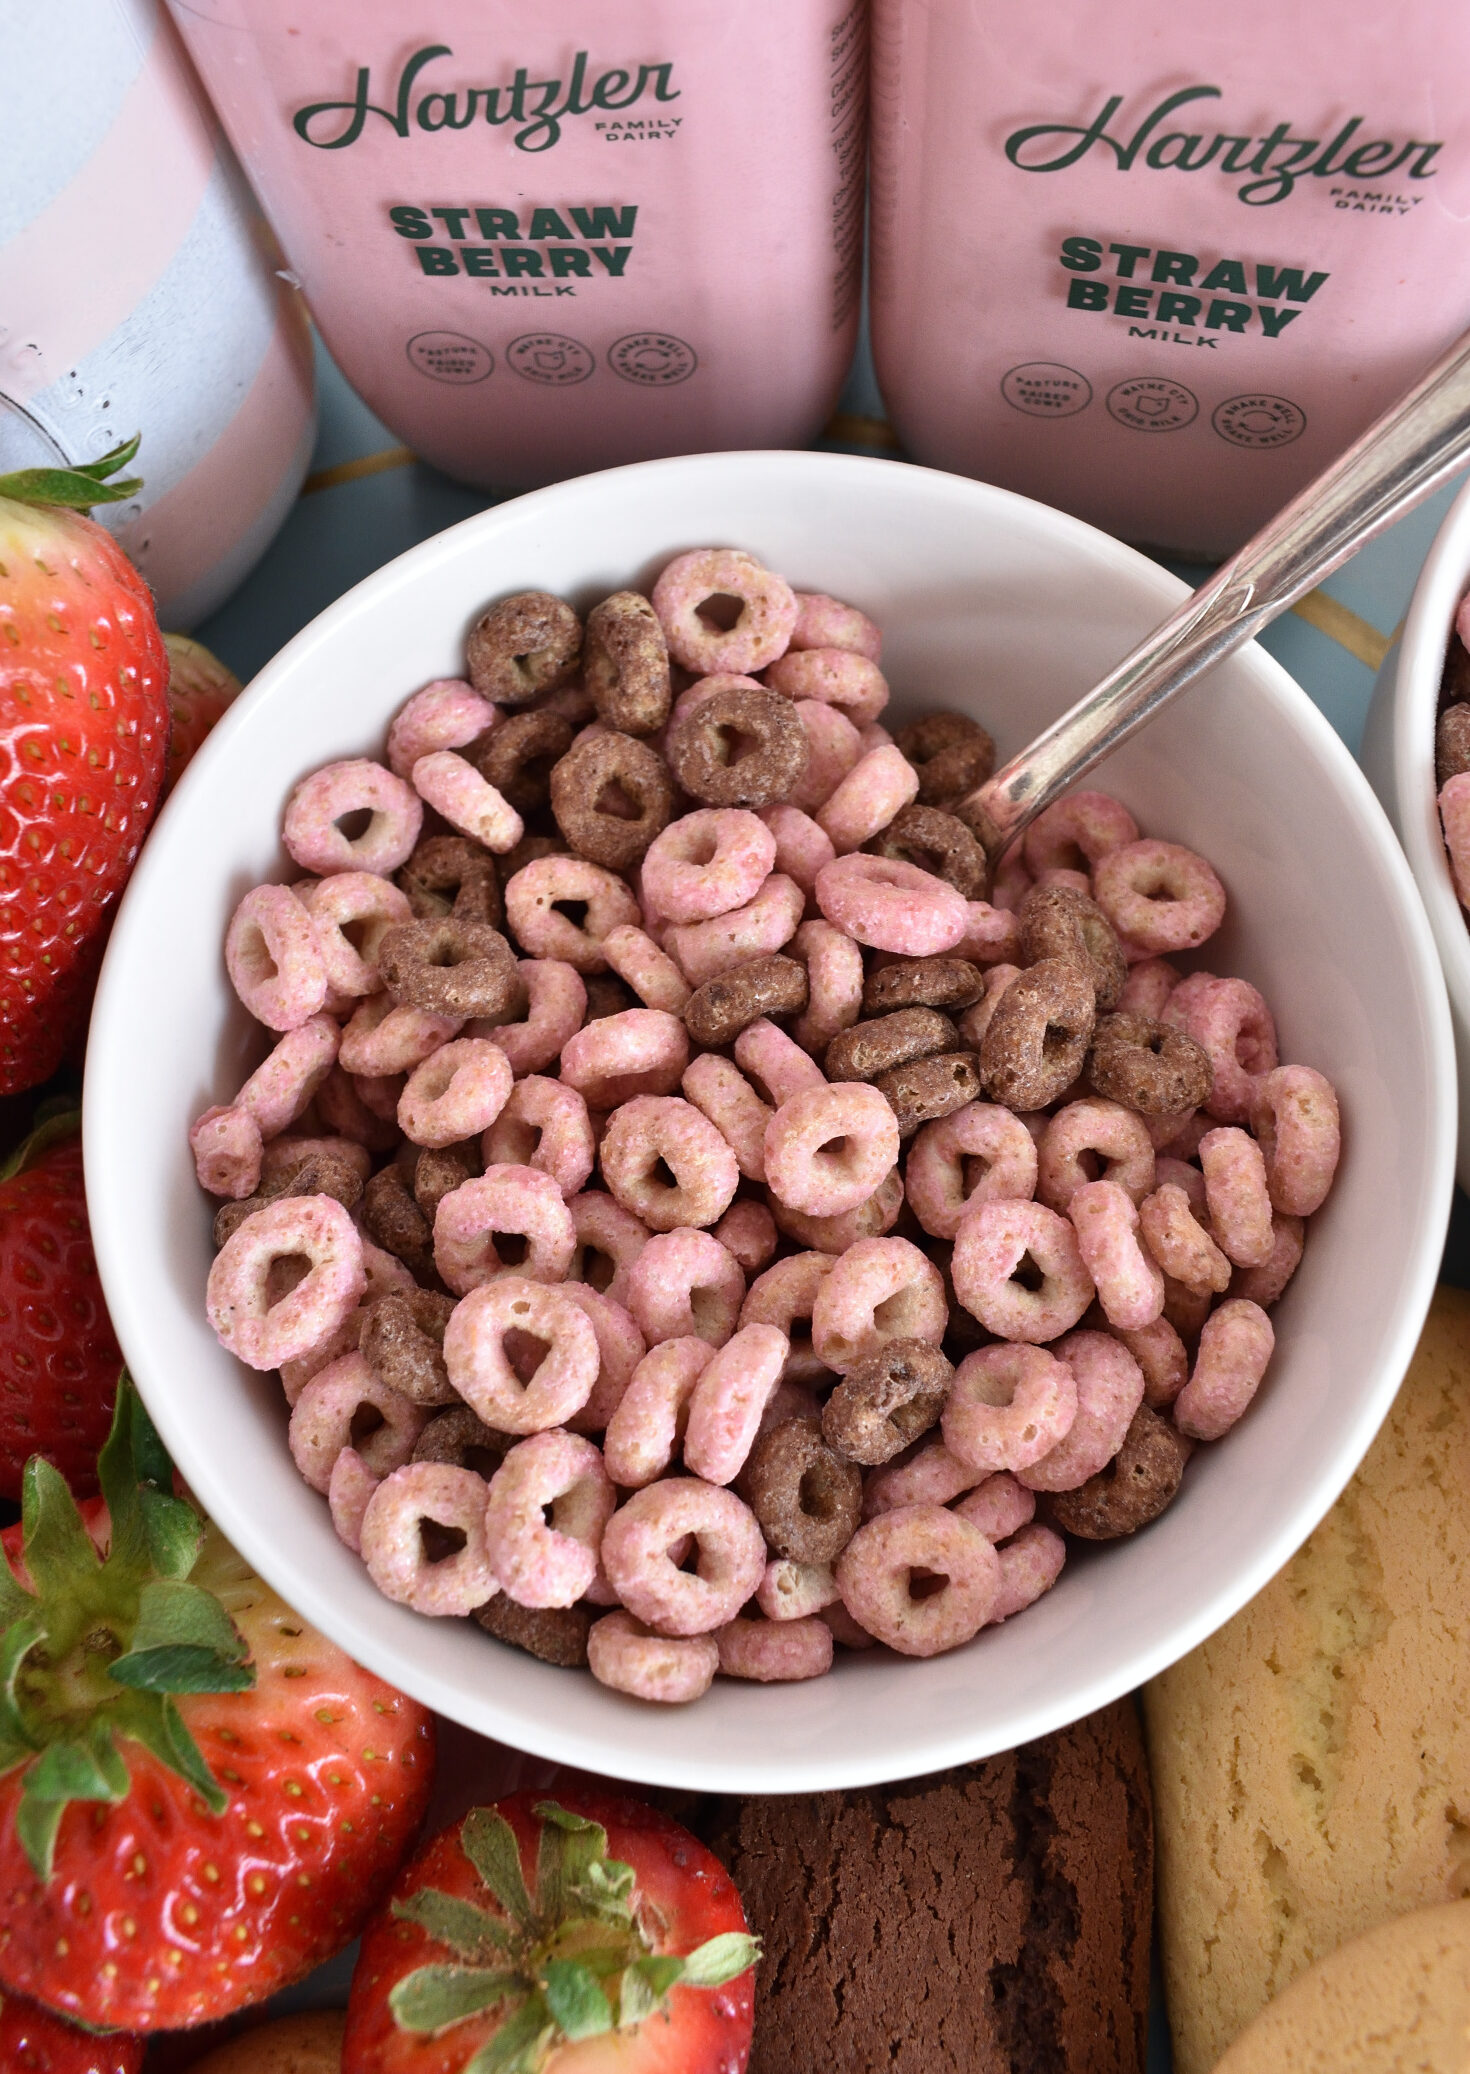 strawberries and chocolate cereal